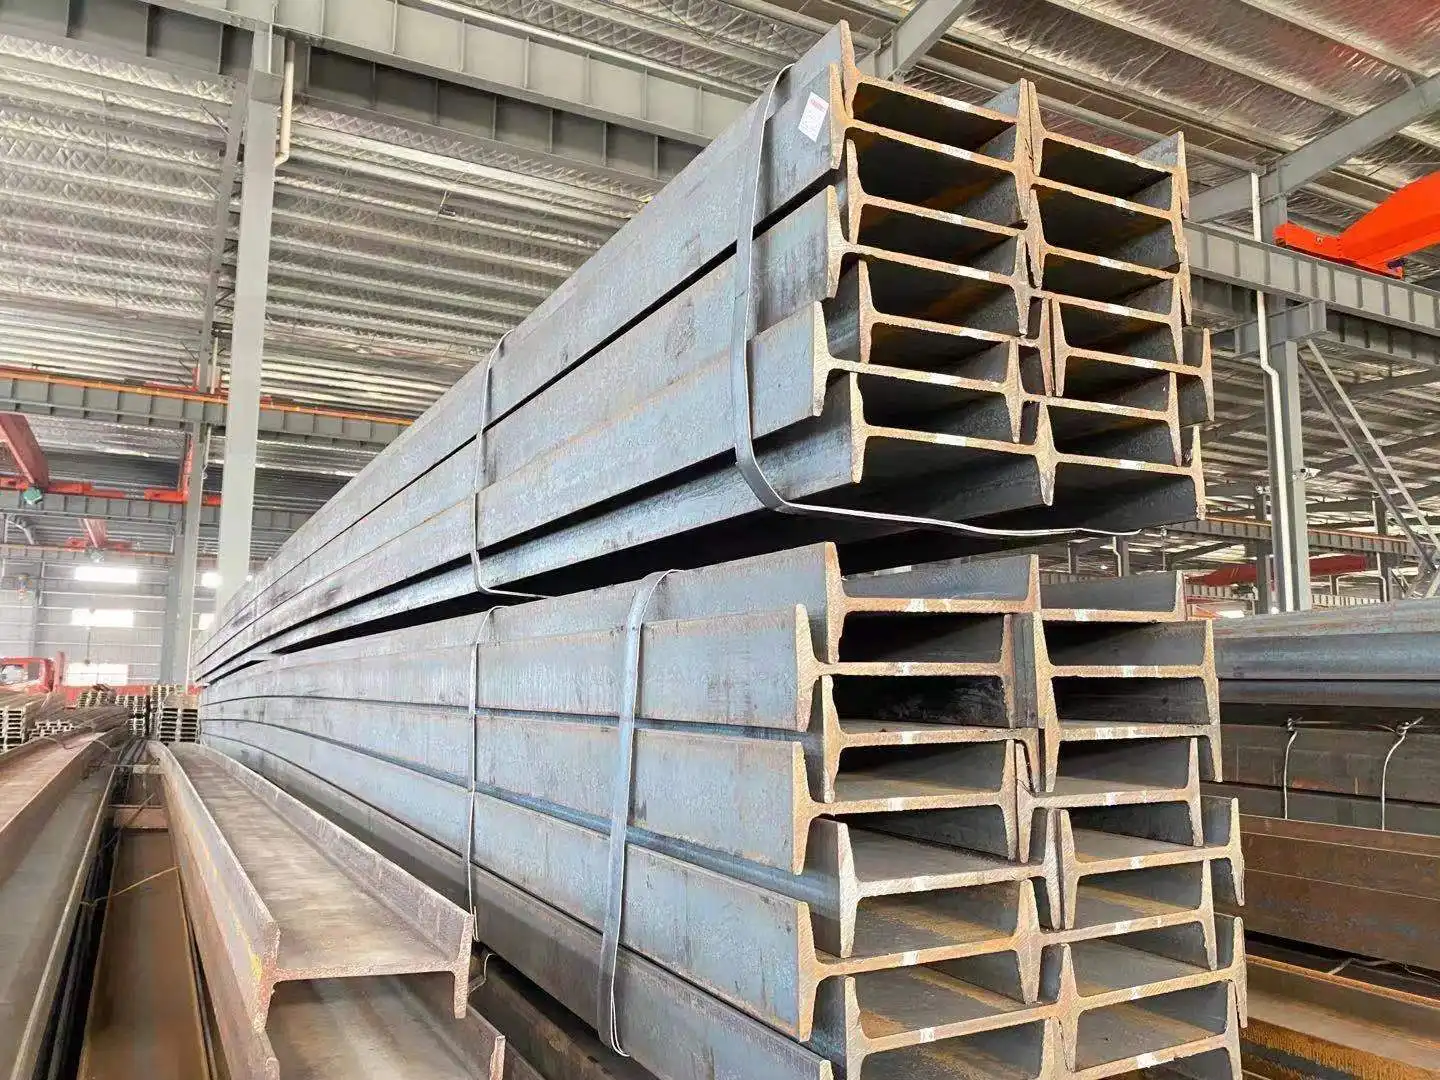 200X200 350 X 175 4 8 600 300 150 75 Price 20 200X150 Used In Construction 250 Home 16 I Beam